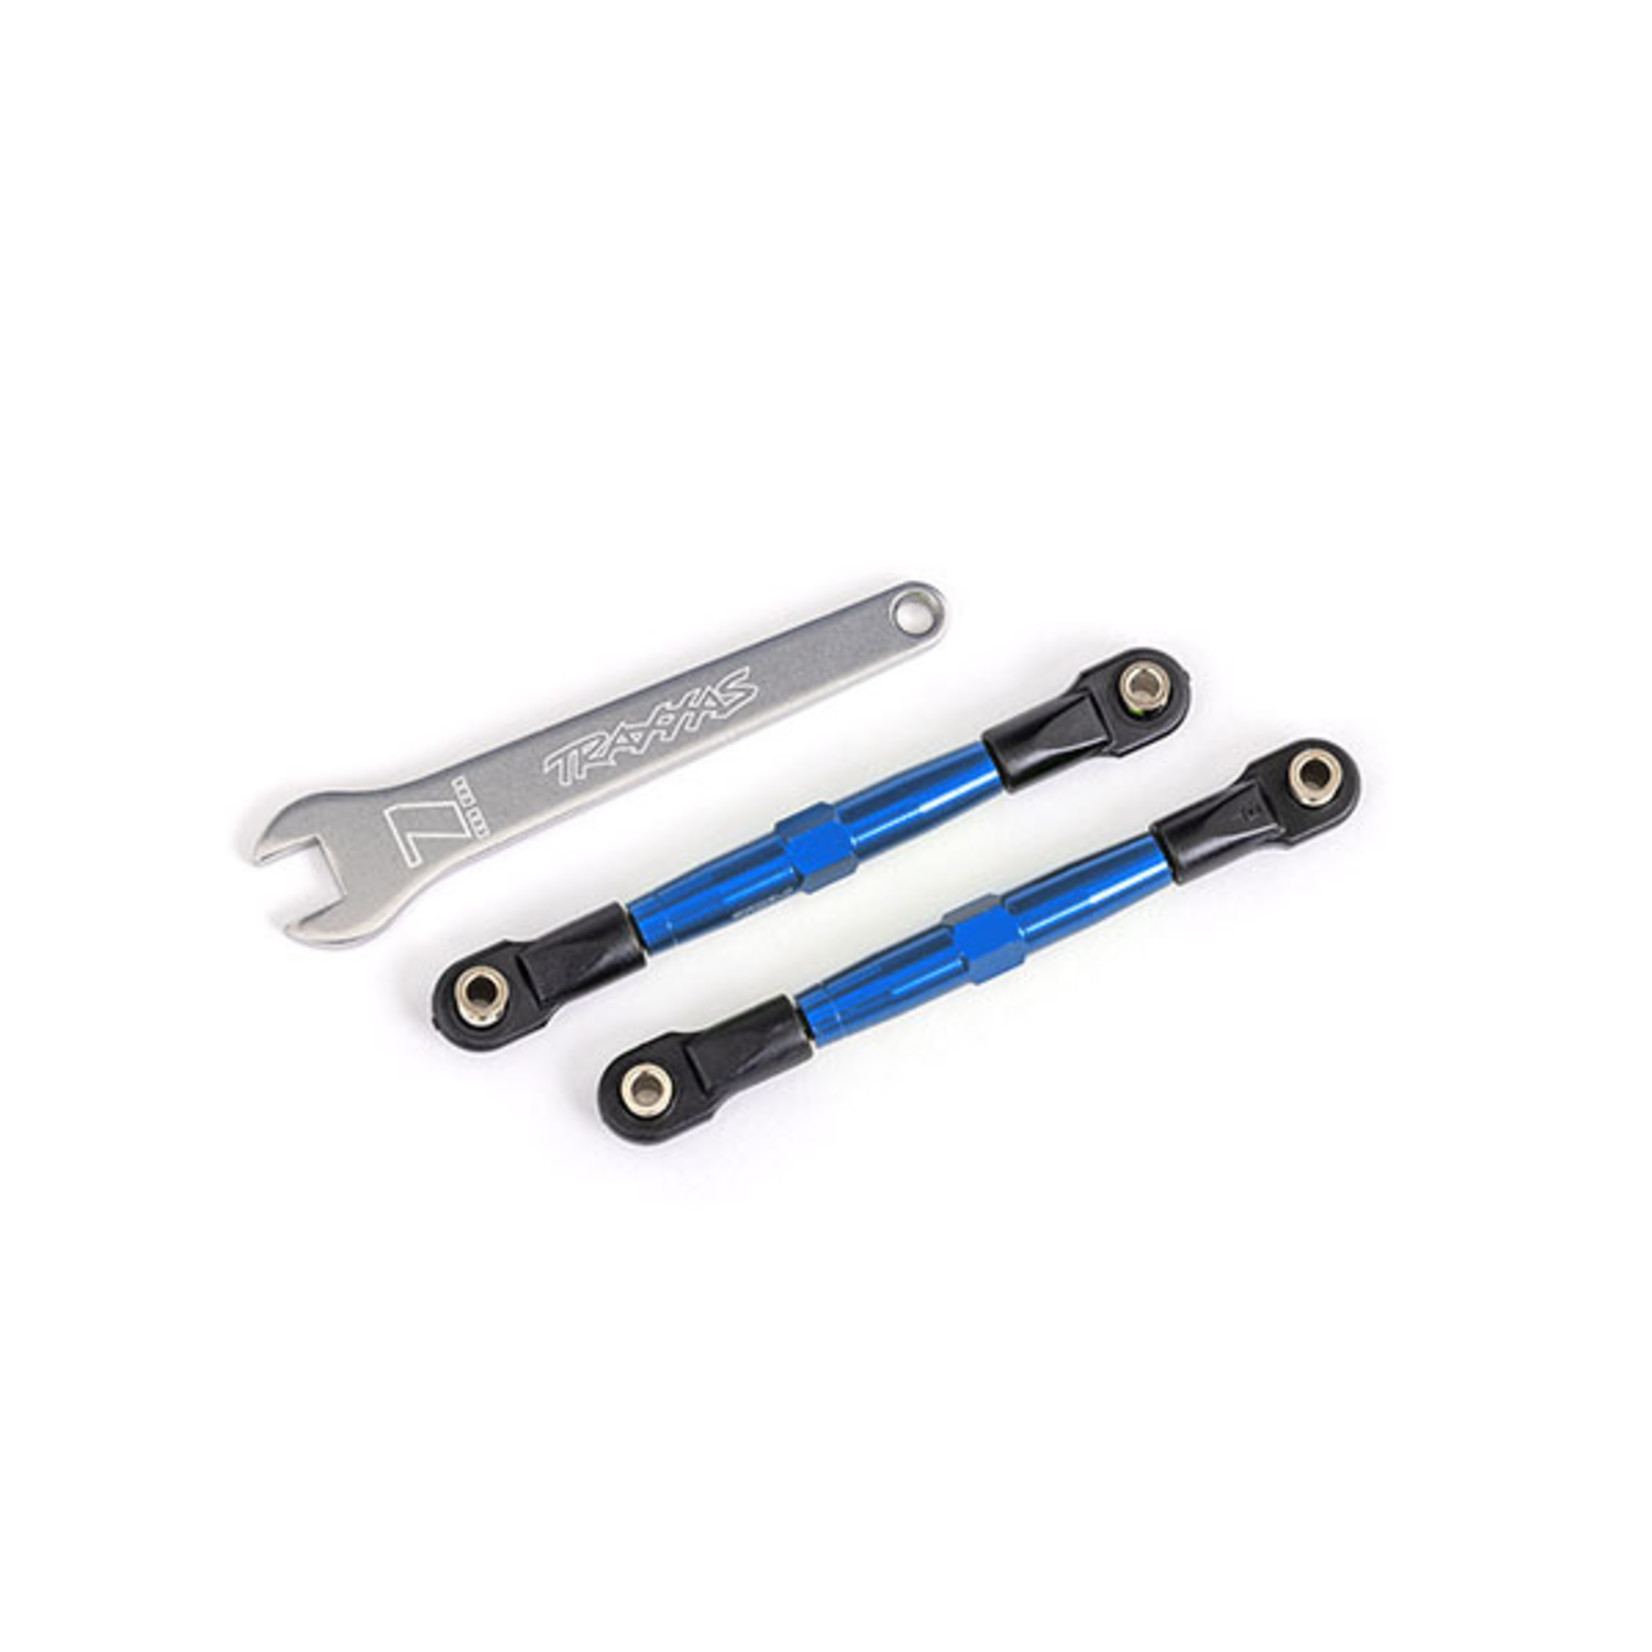 Traxxas 2445X - Toe links, front (TUBES blue-anodized, 707